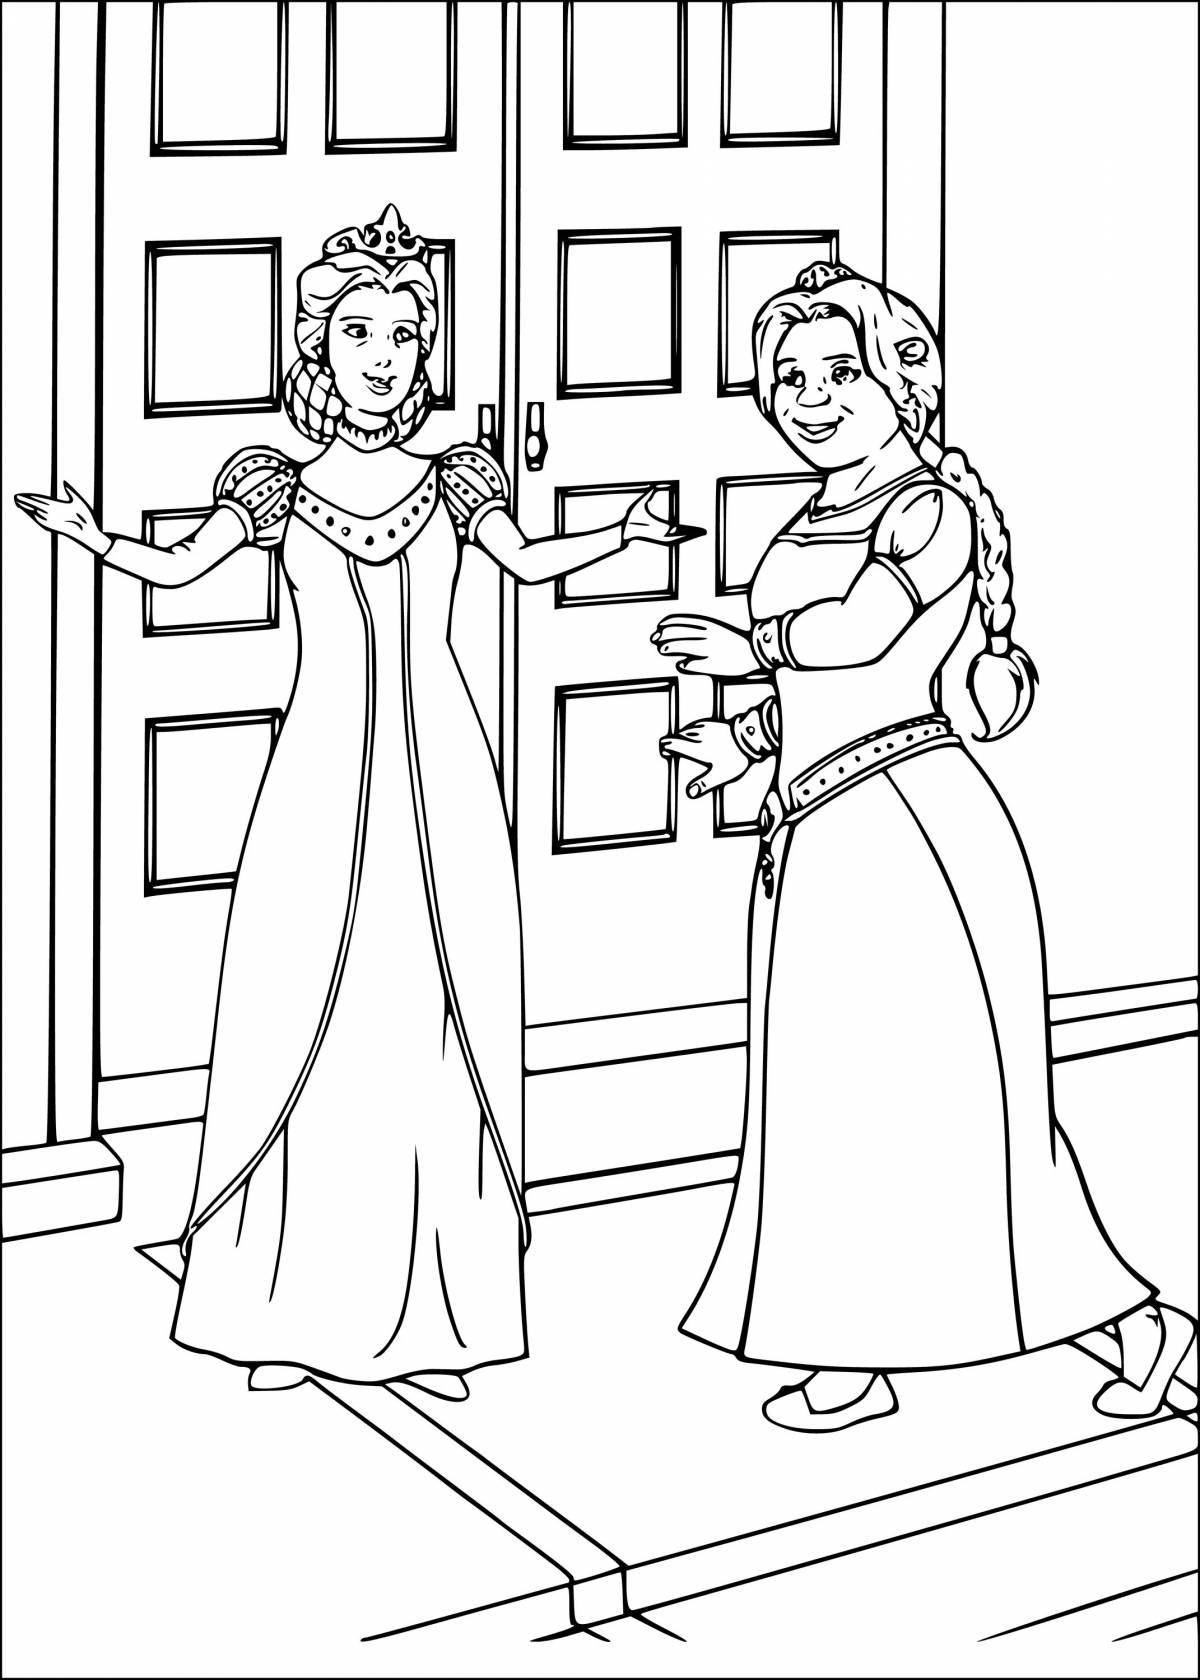 Exalted queen coloring page